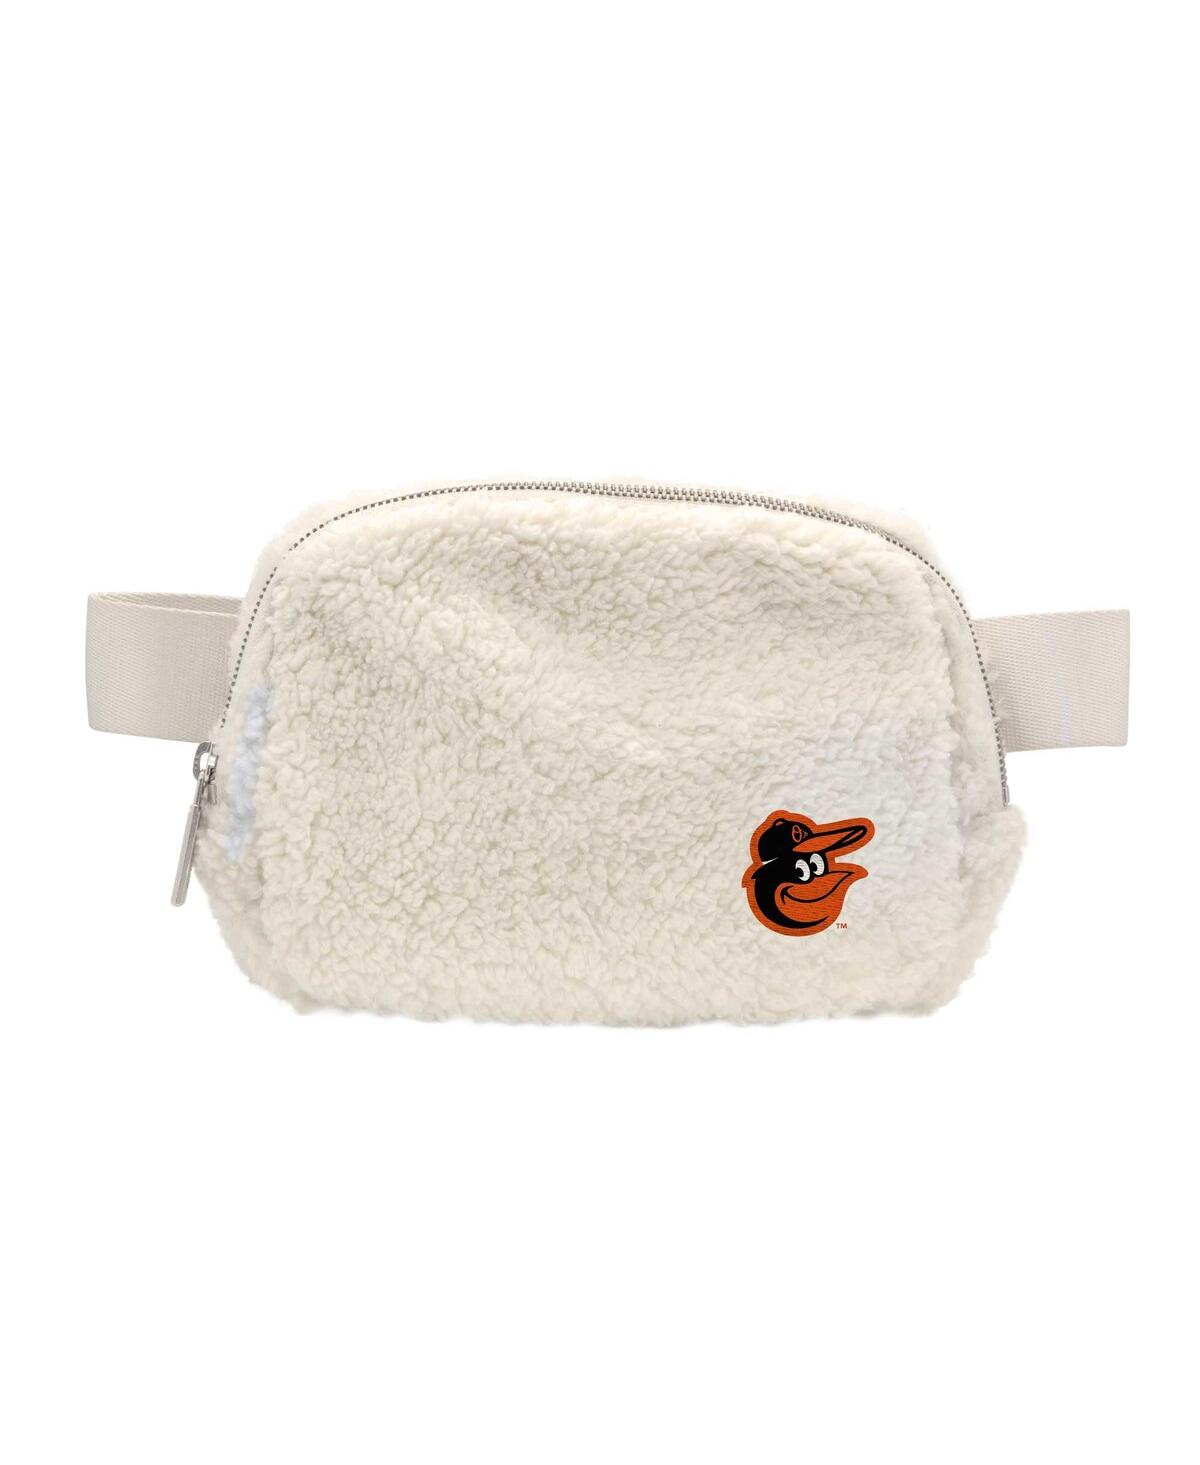 Men's and Women's Baltimore Orioles Sherpa Fanny Pack - White